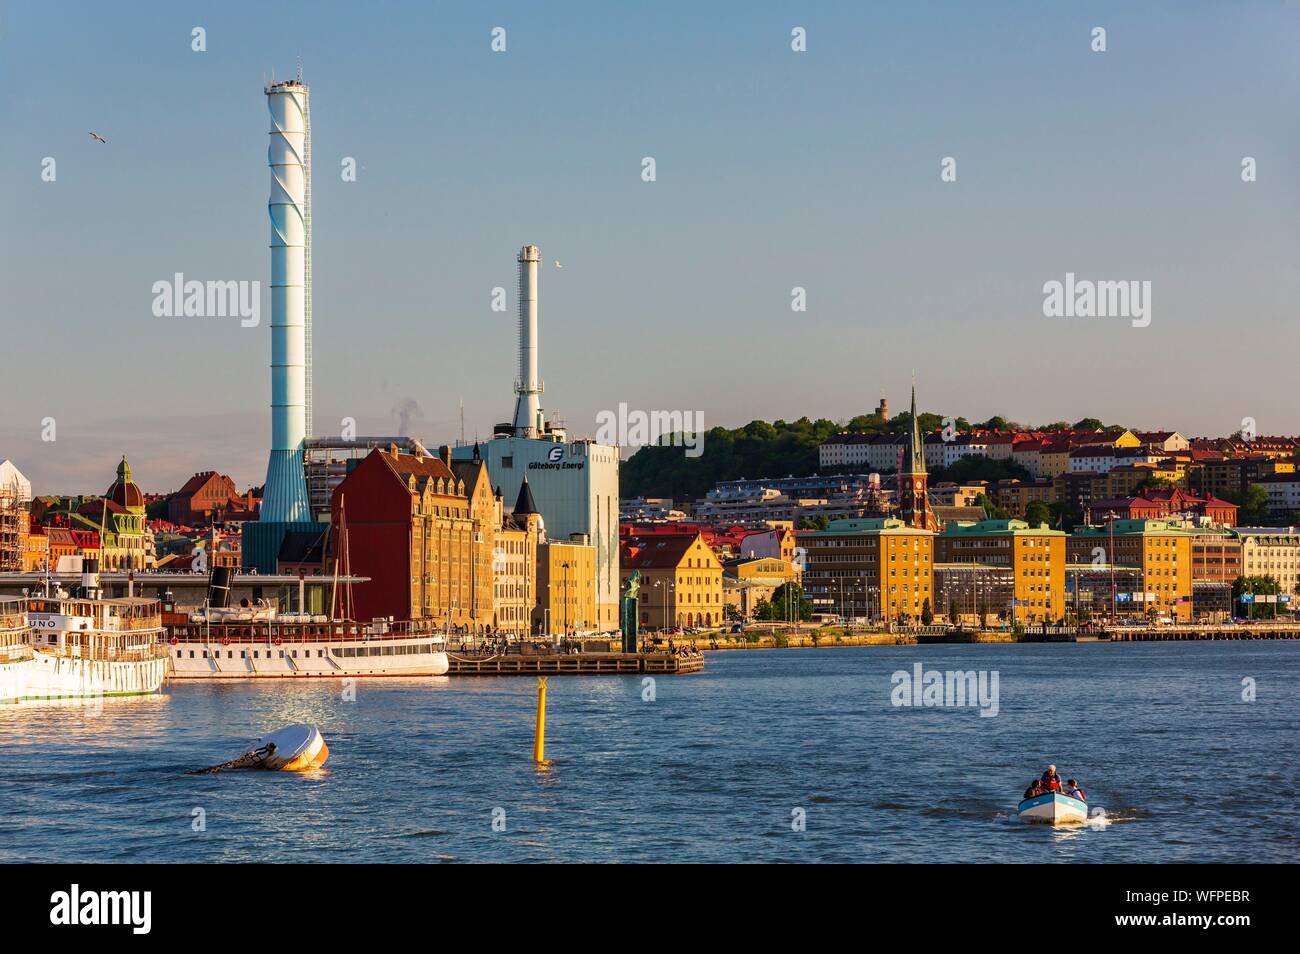 Sweden, Vastra Gotaland, Goteborg (Gothenburg), view of the thermal power plant of the city and the Oscar Fredrik church Stock Photo